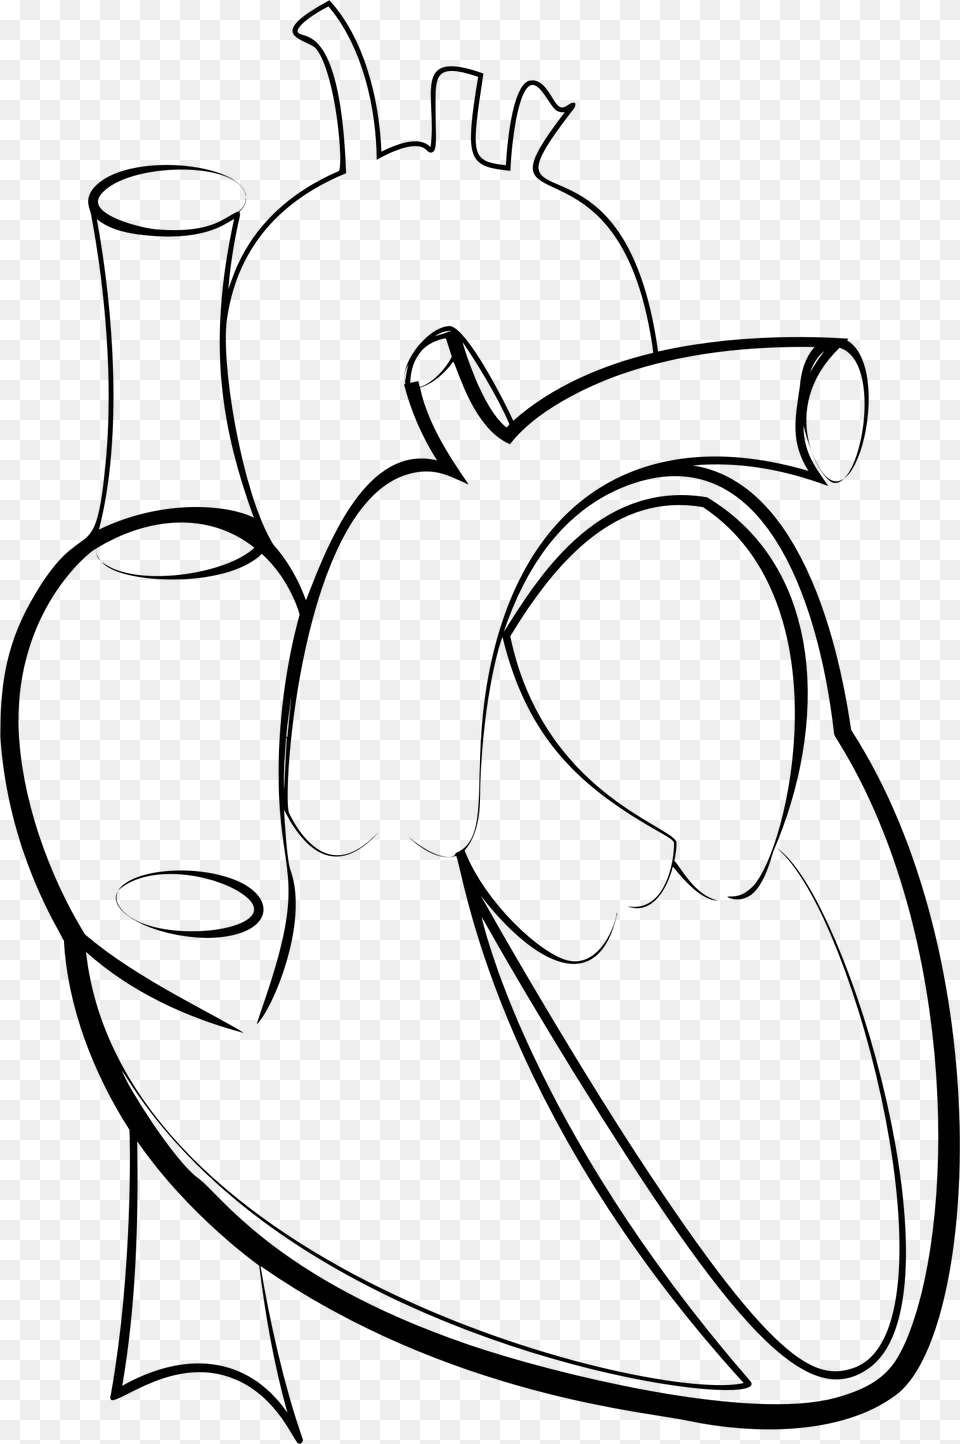 Black Amp White Line Drawing Of Two Love Heart Shapes Outline Images Of Human Heart, Pottery Free Transparent Png